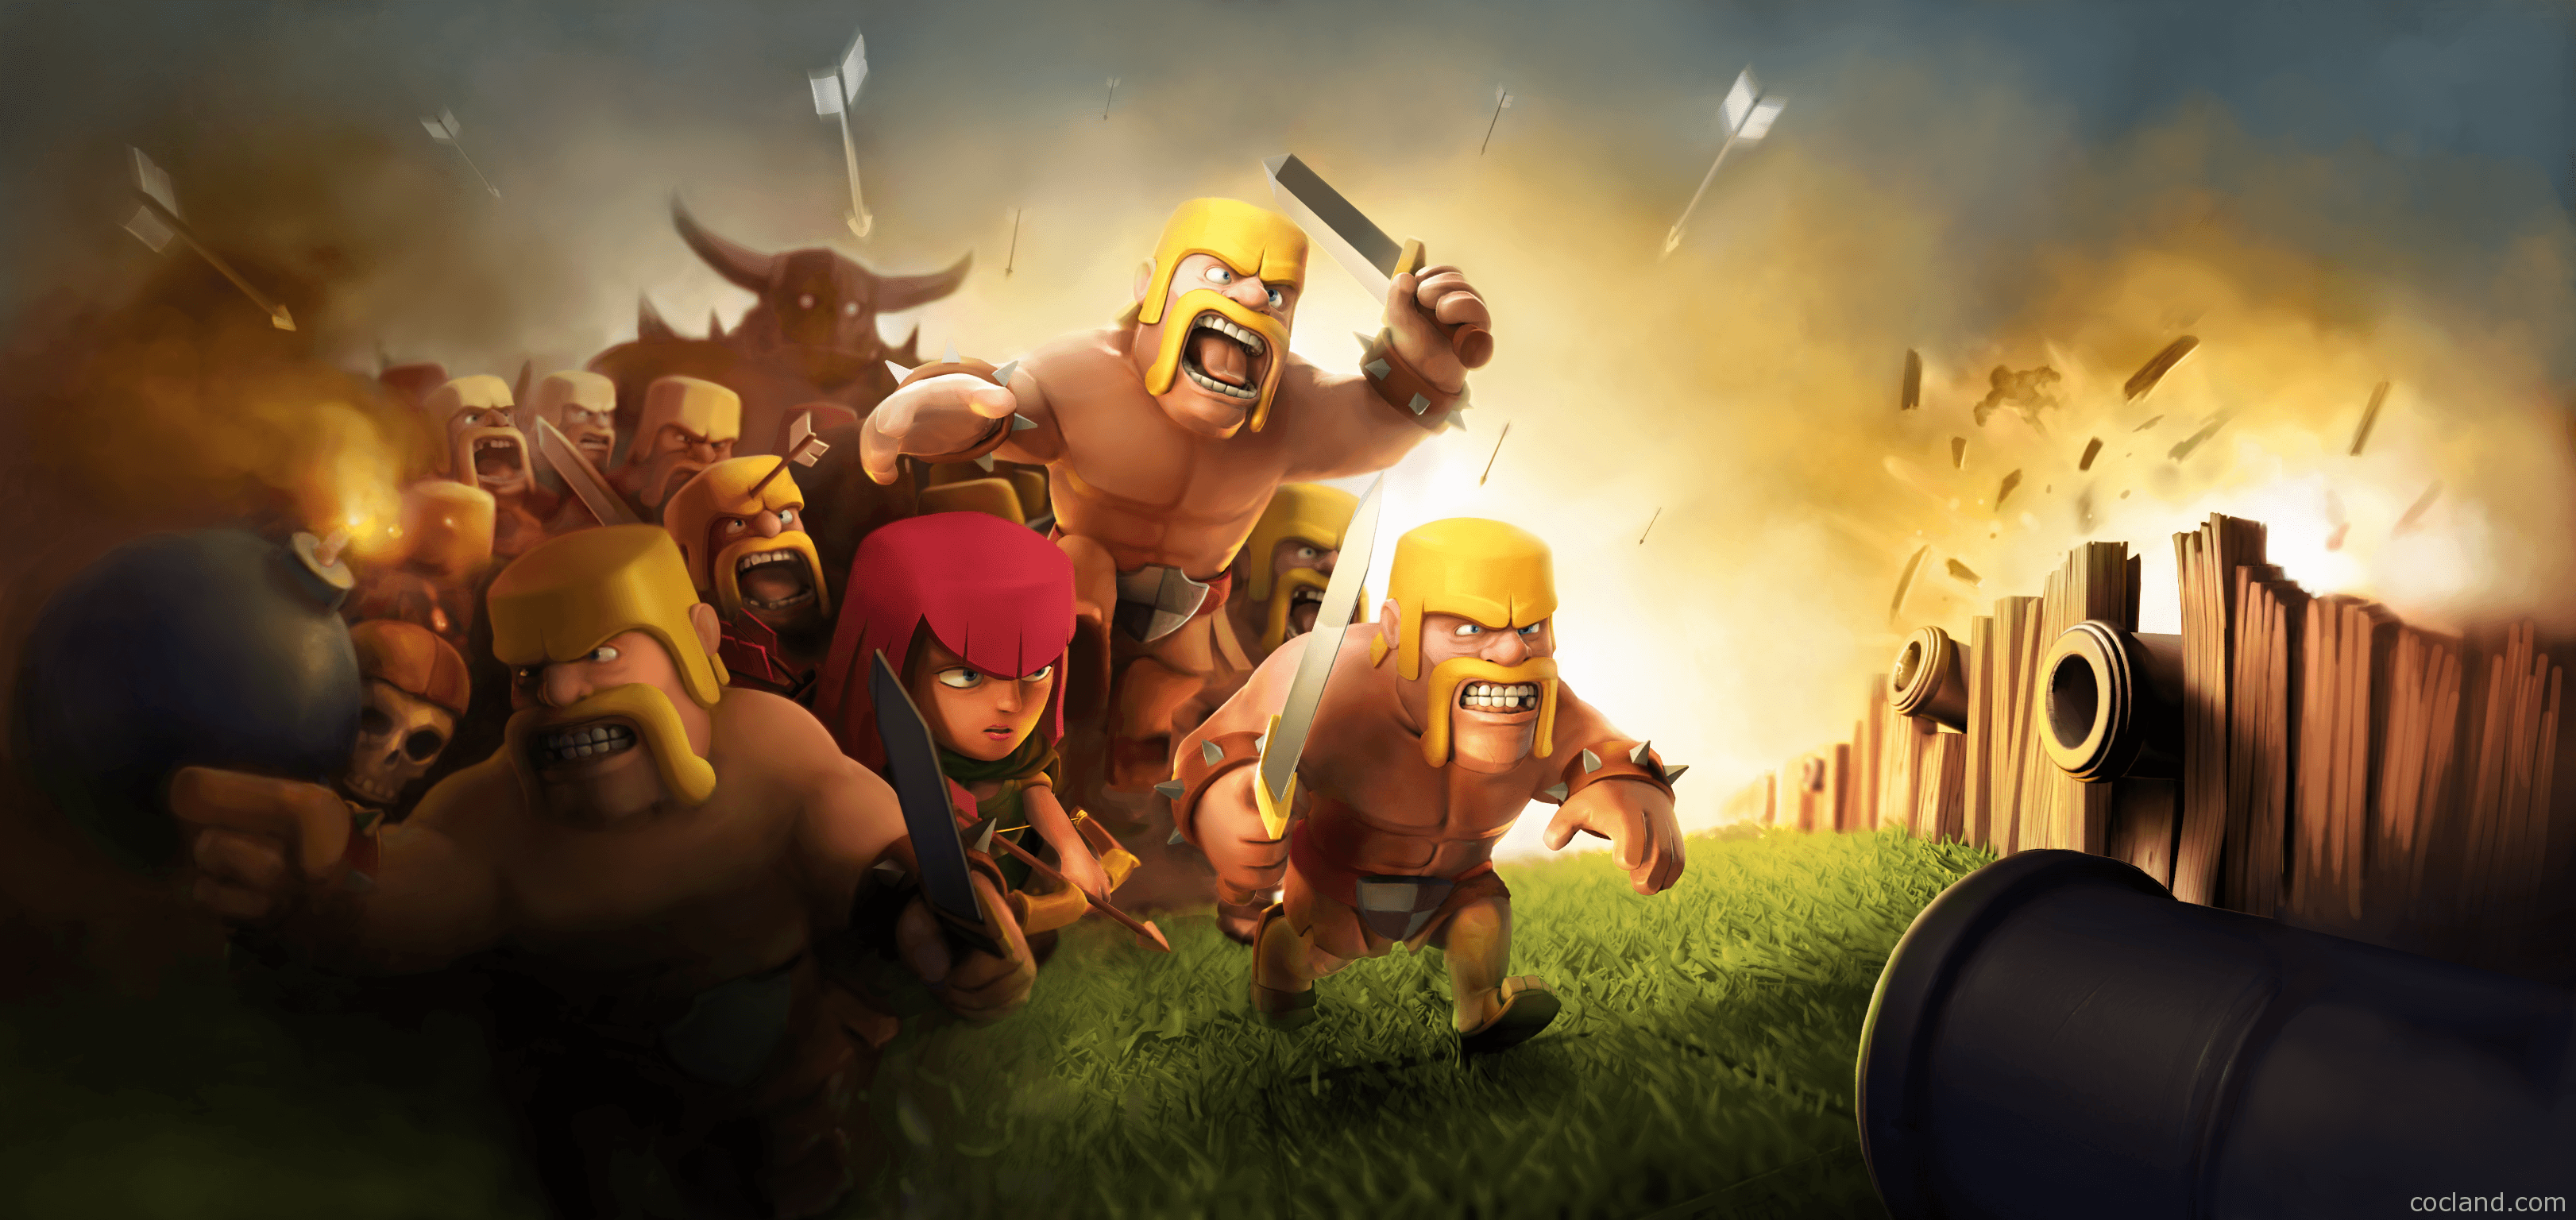 Clash of Clans HD Wallpaper. Clash of Clans Land